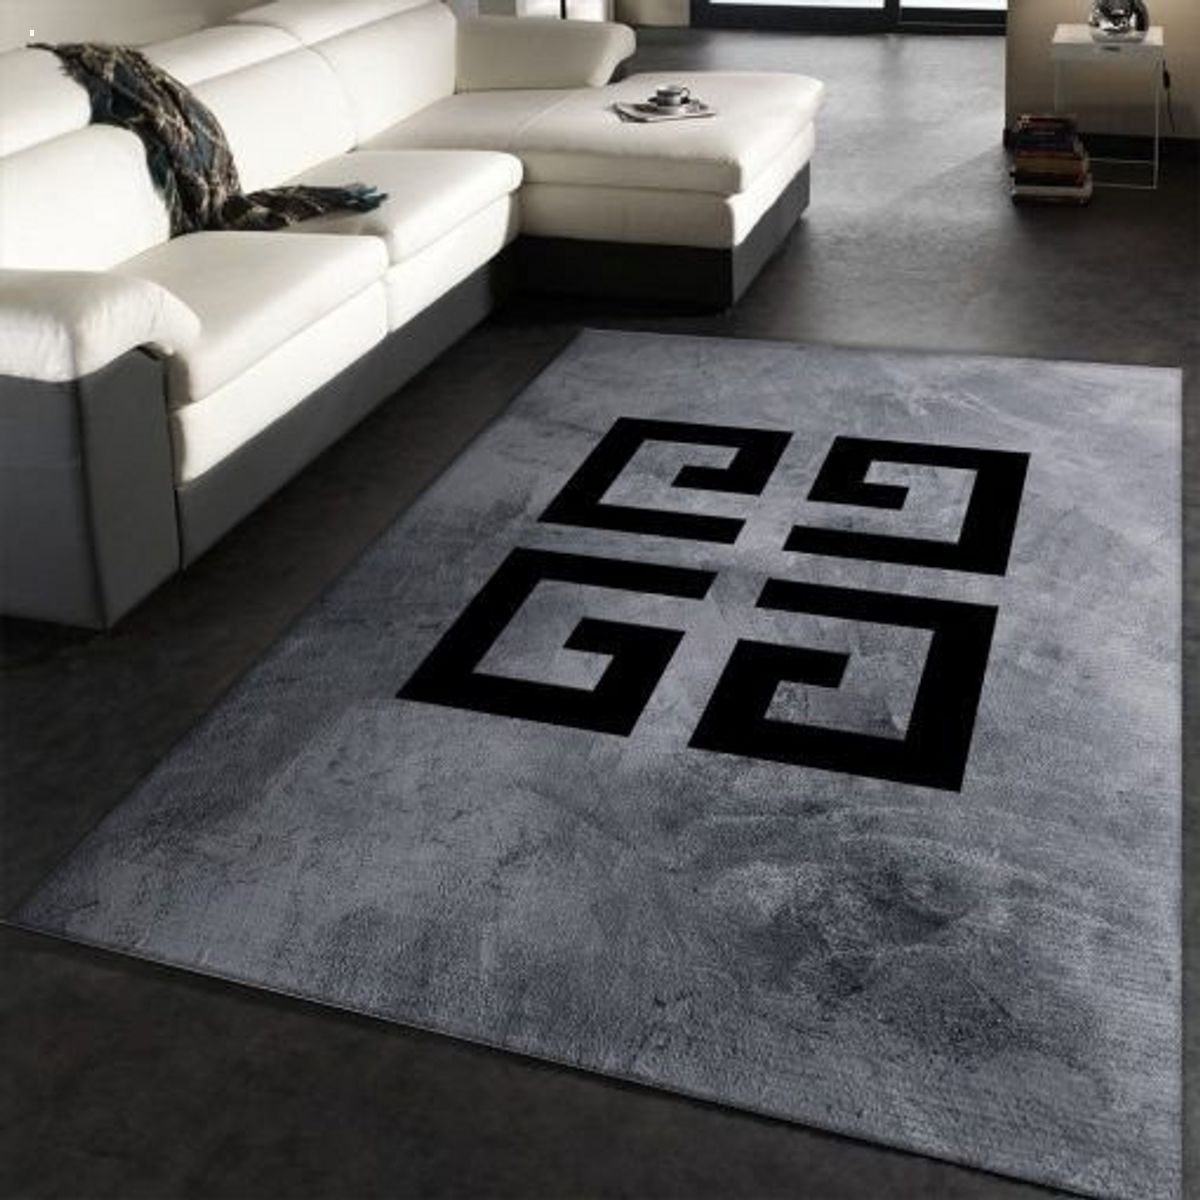 Givenchy Black Luxury Brand Carpet Rug Limited Edition